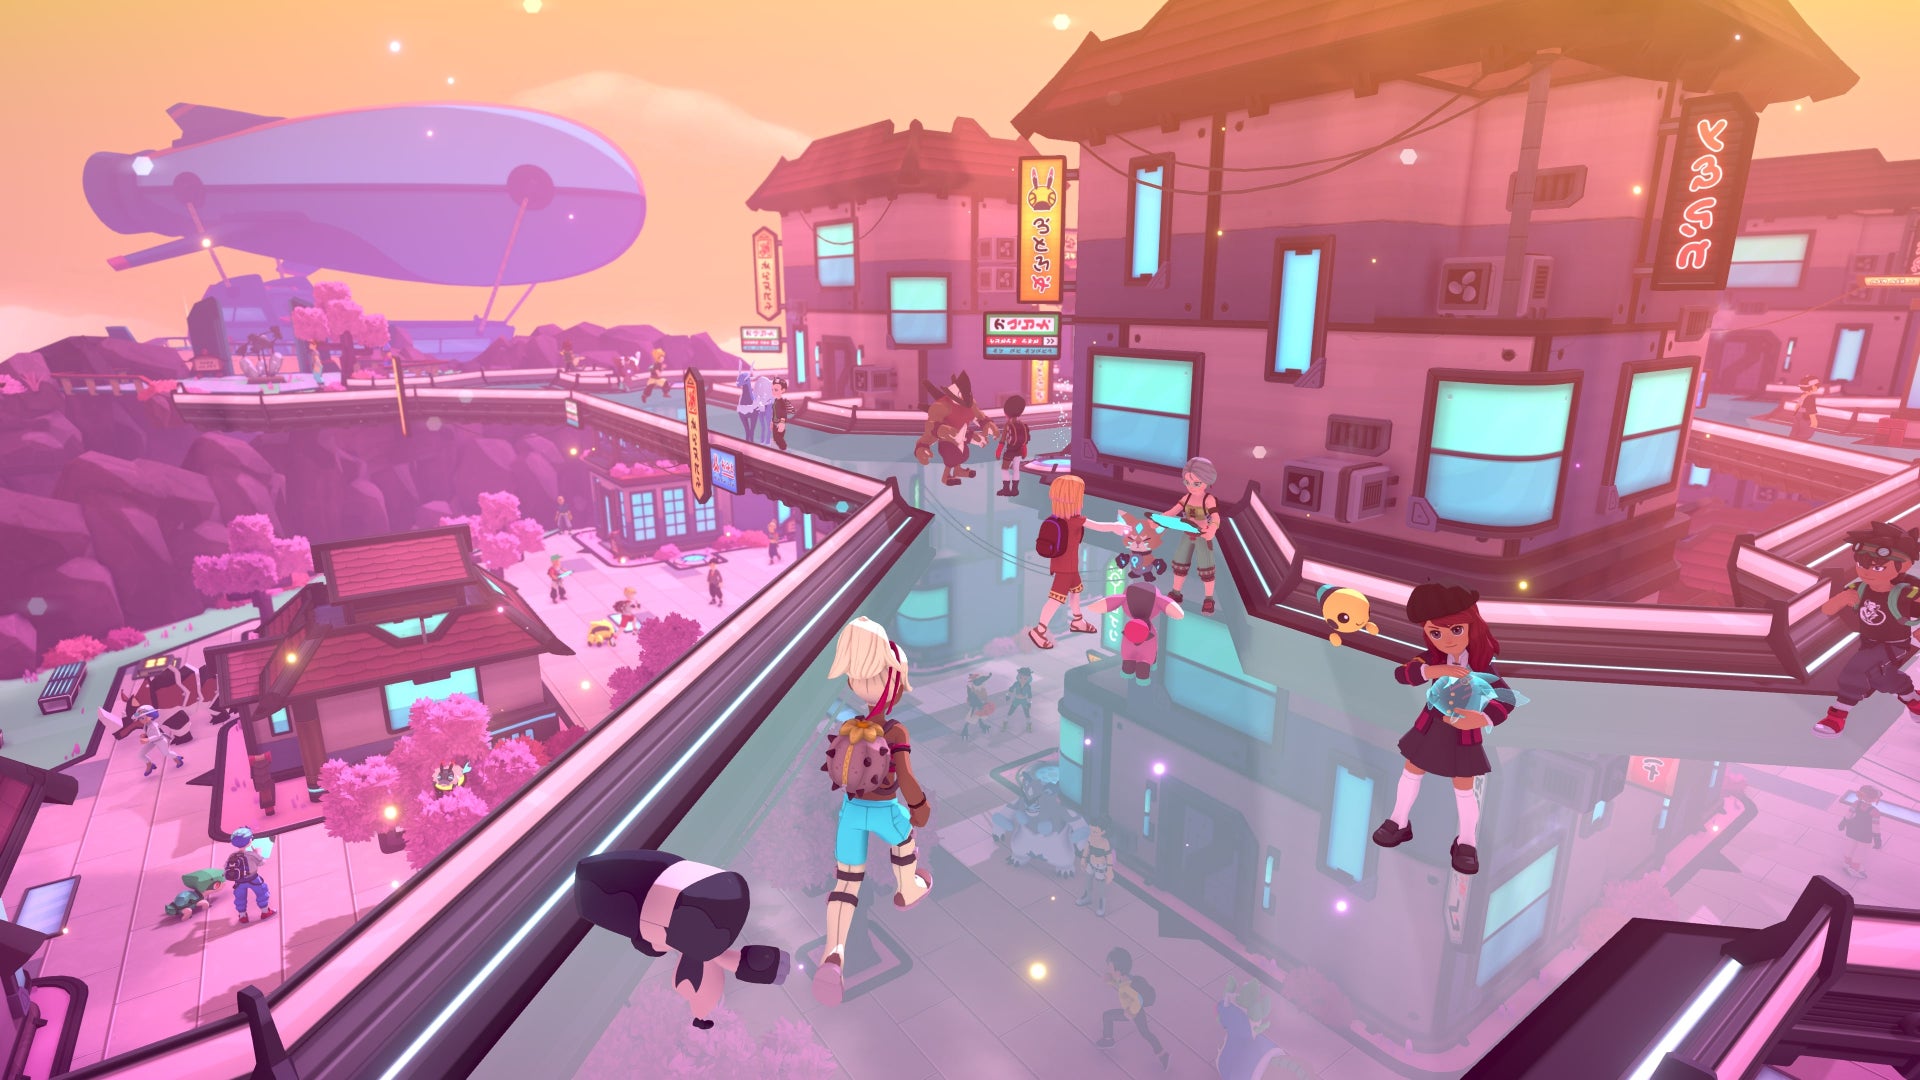 Players can be seen walking around a city in Temtem